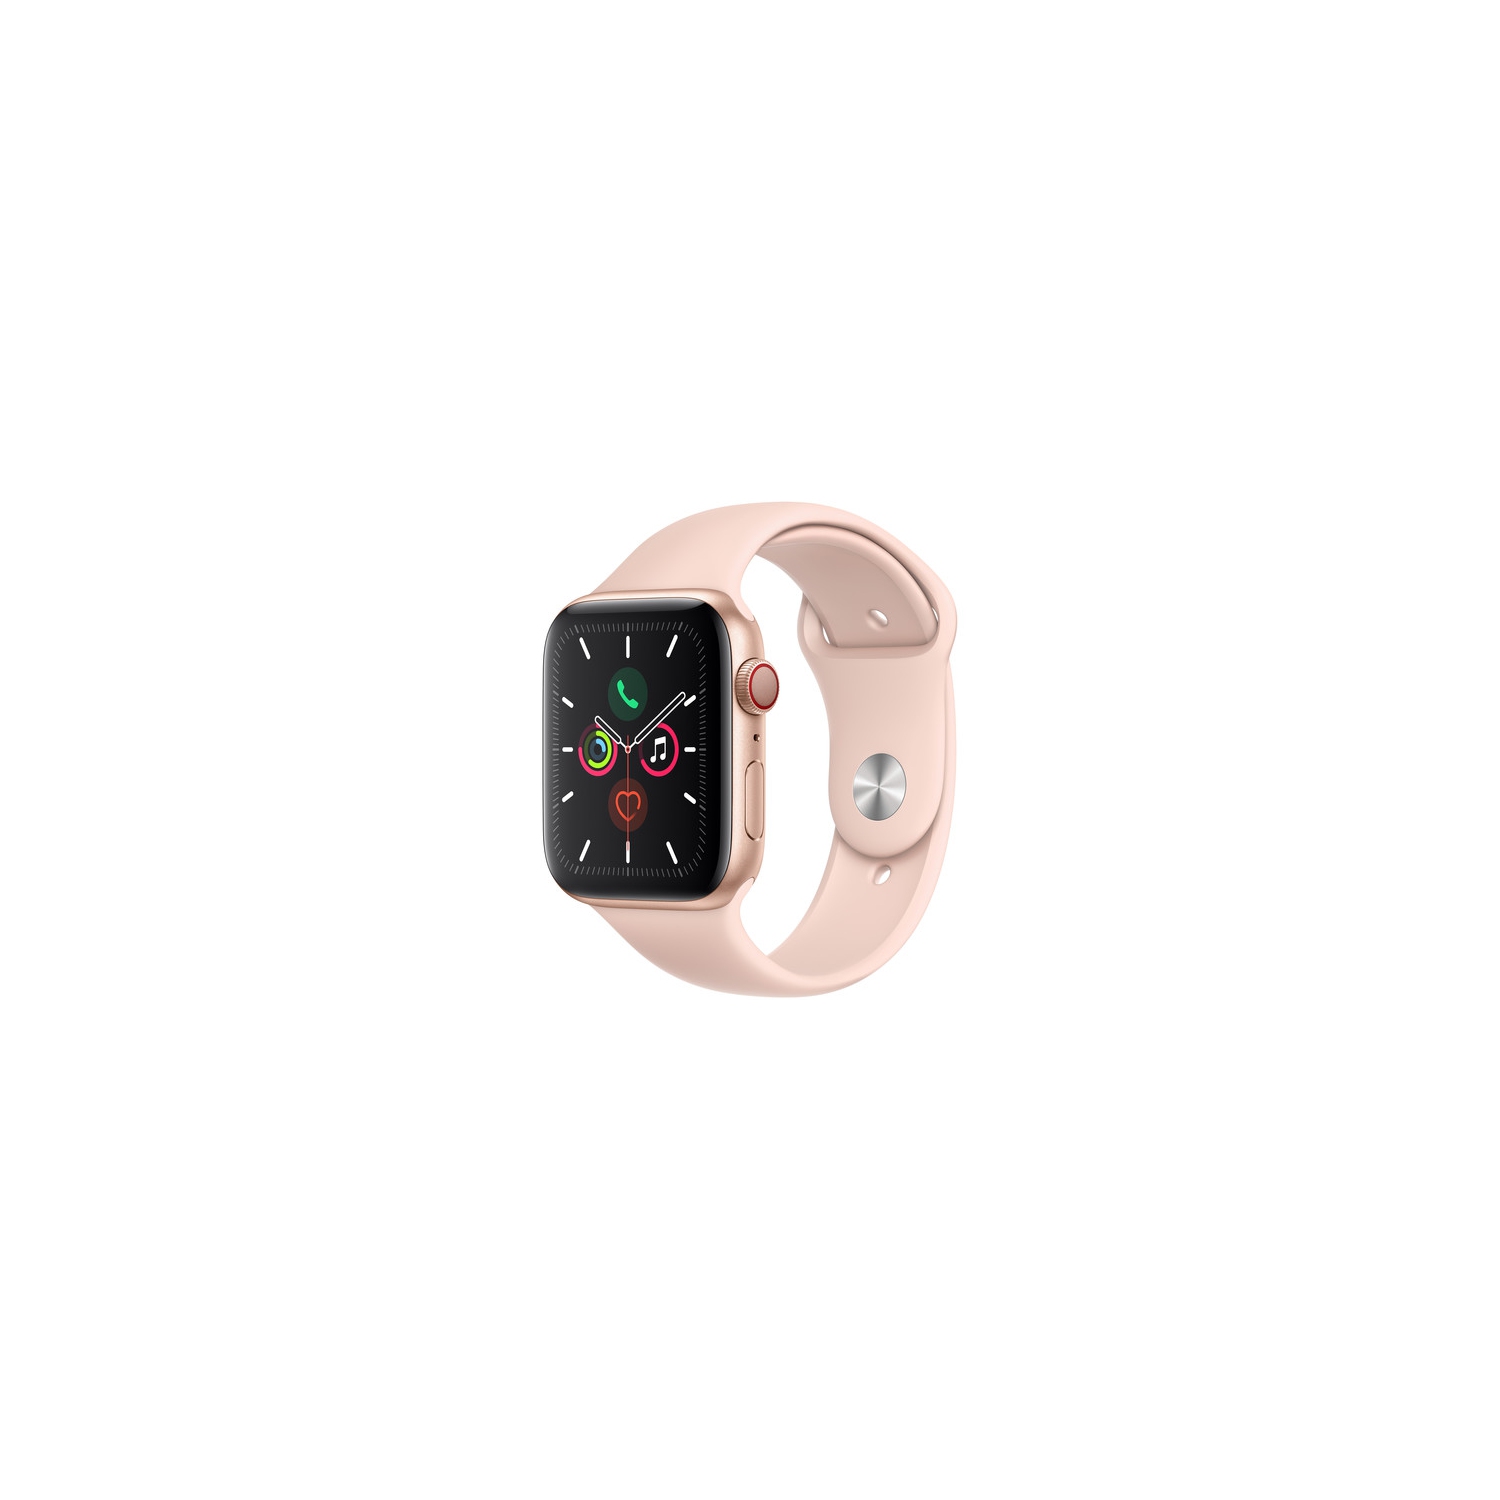 Apple Watch Series 5 (GPS + Cellular) 44mm Gold Aluminum with Pink Sand Sport Band - New